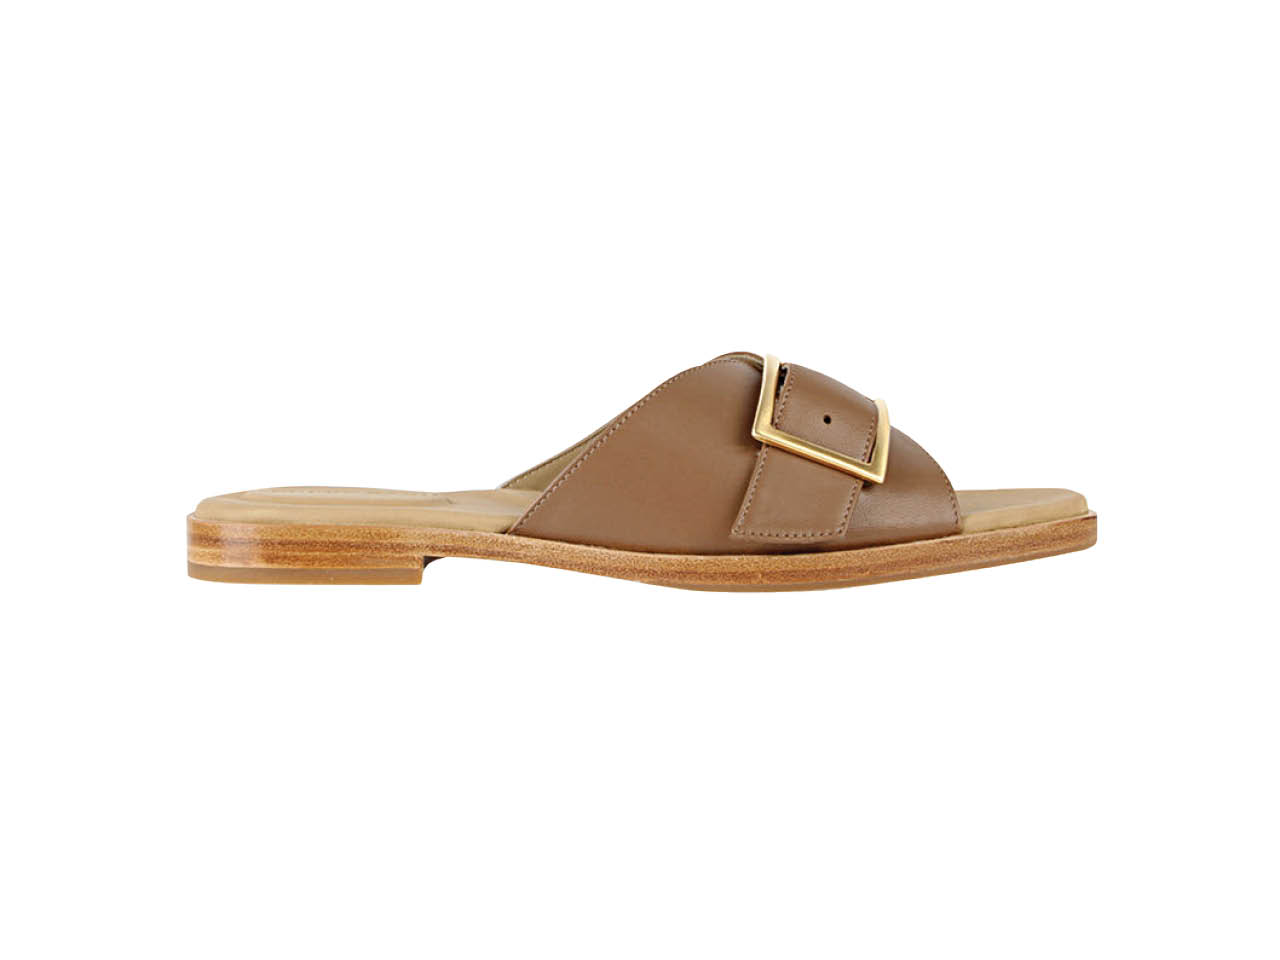 A single tan leather slide with a large brass buckle from Poppy Barley for a summer look.